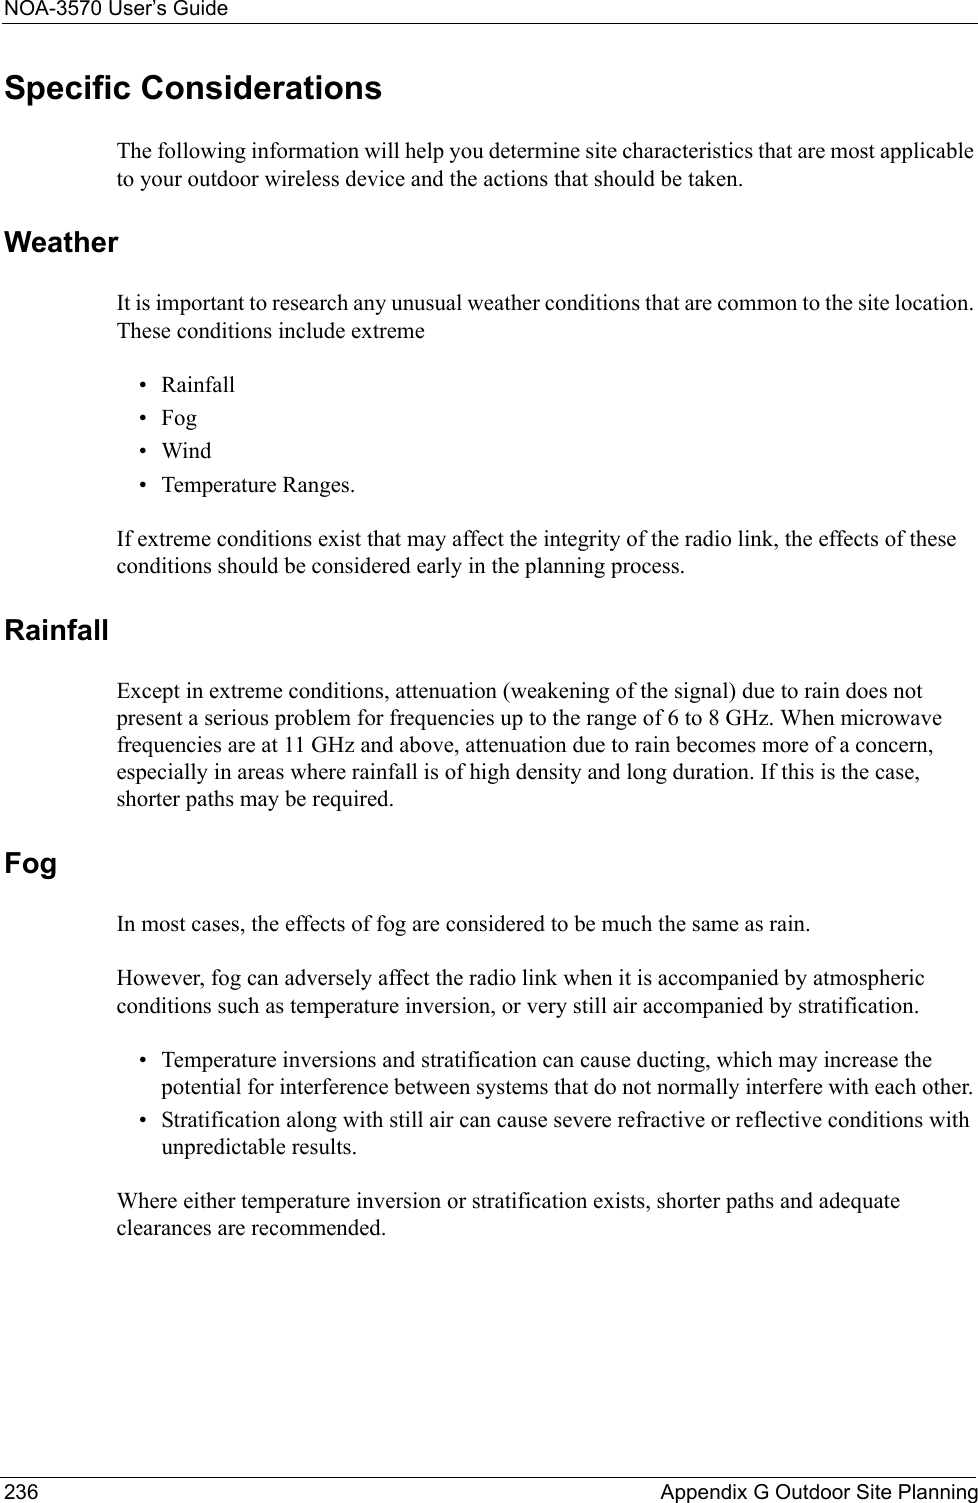 NOA-3570 User’s Guide236 Appendix G Outdoor Site PlanningSpecific ConsiderationsThe following information will help you determine site characteristics that are most applicable to your outdoor wireless device and the actions that should be taken.WeatherIt is important to research any unusual weather conditions that are common to the site location. These conditions include extreme• Rainfall•Fog•Wind • Temperature Ranges. If extreme conditions exist that may affect the integrity of the radio link, the effects of these conditions should be considered early in the planning process.Rainfall Except in extreme conditions, attenuation (weakening of the signal) due to rain does not present a serious problem for frequencies up to the range of 6 to 8 GHz. When microwave frequencies are at 11 GHz and above, attenuation due to rain becomes more of a concern, especially in areas where rainfall is of high density and long duration. If this is the case, shorter paths may be required.FogIn most cases, the effects of fog are considered to be much the same as rain. However, fog can adversely affect the radio link when it is accompanied by atmospheric conditions such as temperature inversion, or very still air accompanied by stratification. • Temperature inversions and stratification can cause ducting, which may increase the potential for interference between systems that do not normally interfere with each other. • Stratification along with still air can cause severe refractive or reflective conditions with unpredictable results. Where either temperature inversion or stratification exists, shorter paths and adequate clearances are recommended.